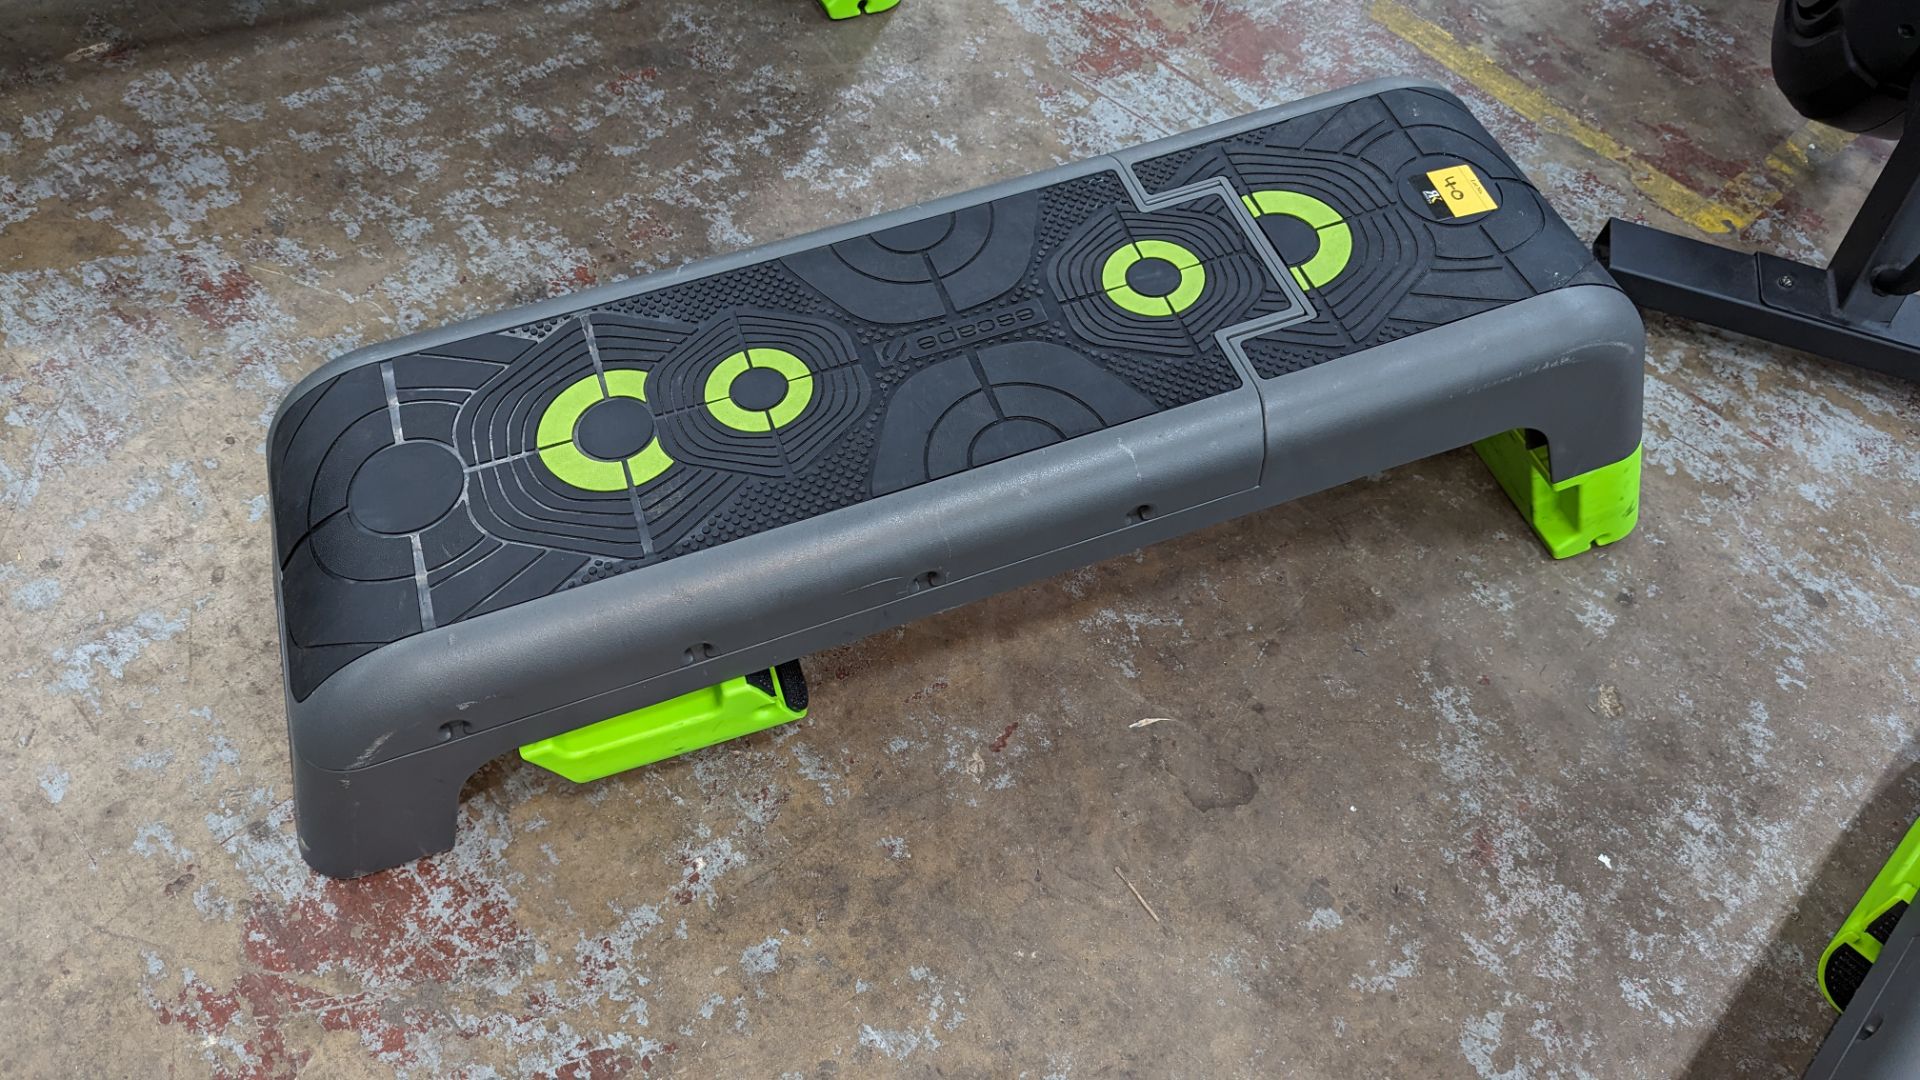 Escape Deck 2.0 multi-adjustable aerobic work-out step/platform, two height levels, fast release leg - Image 3 of 6